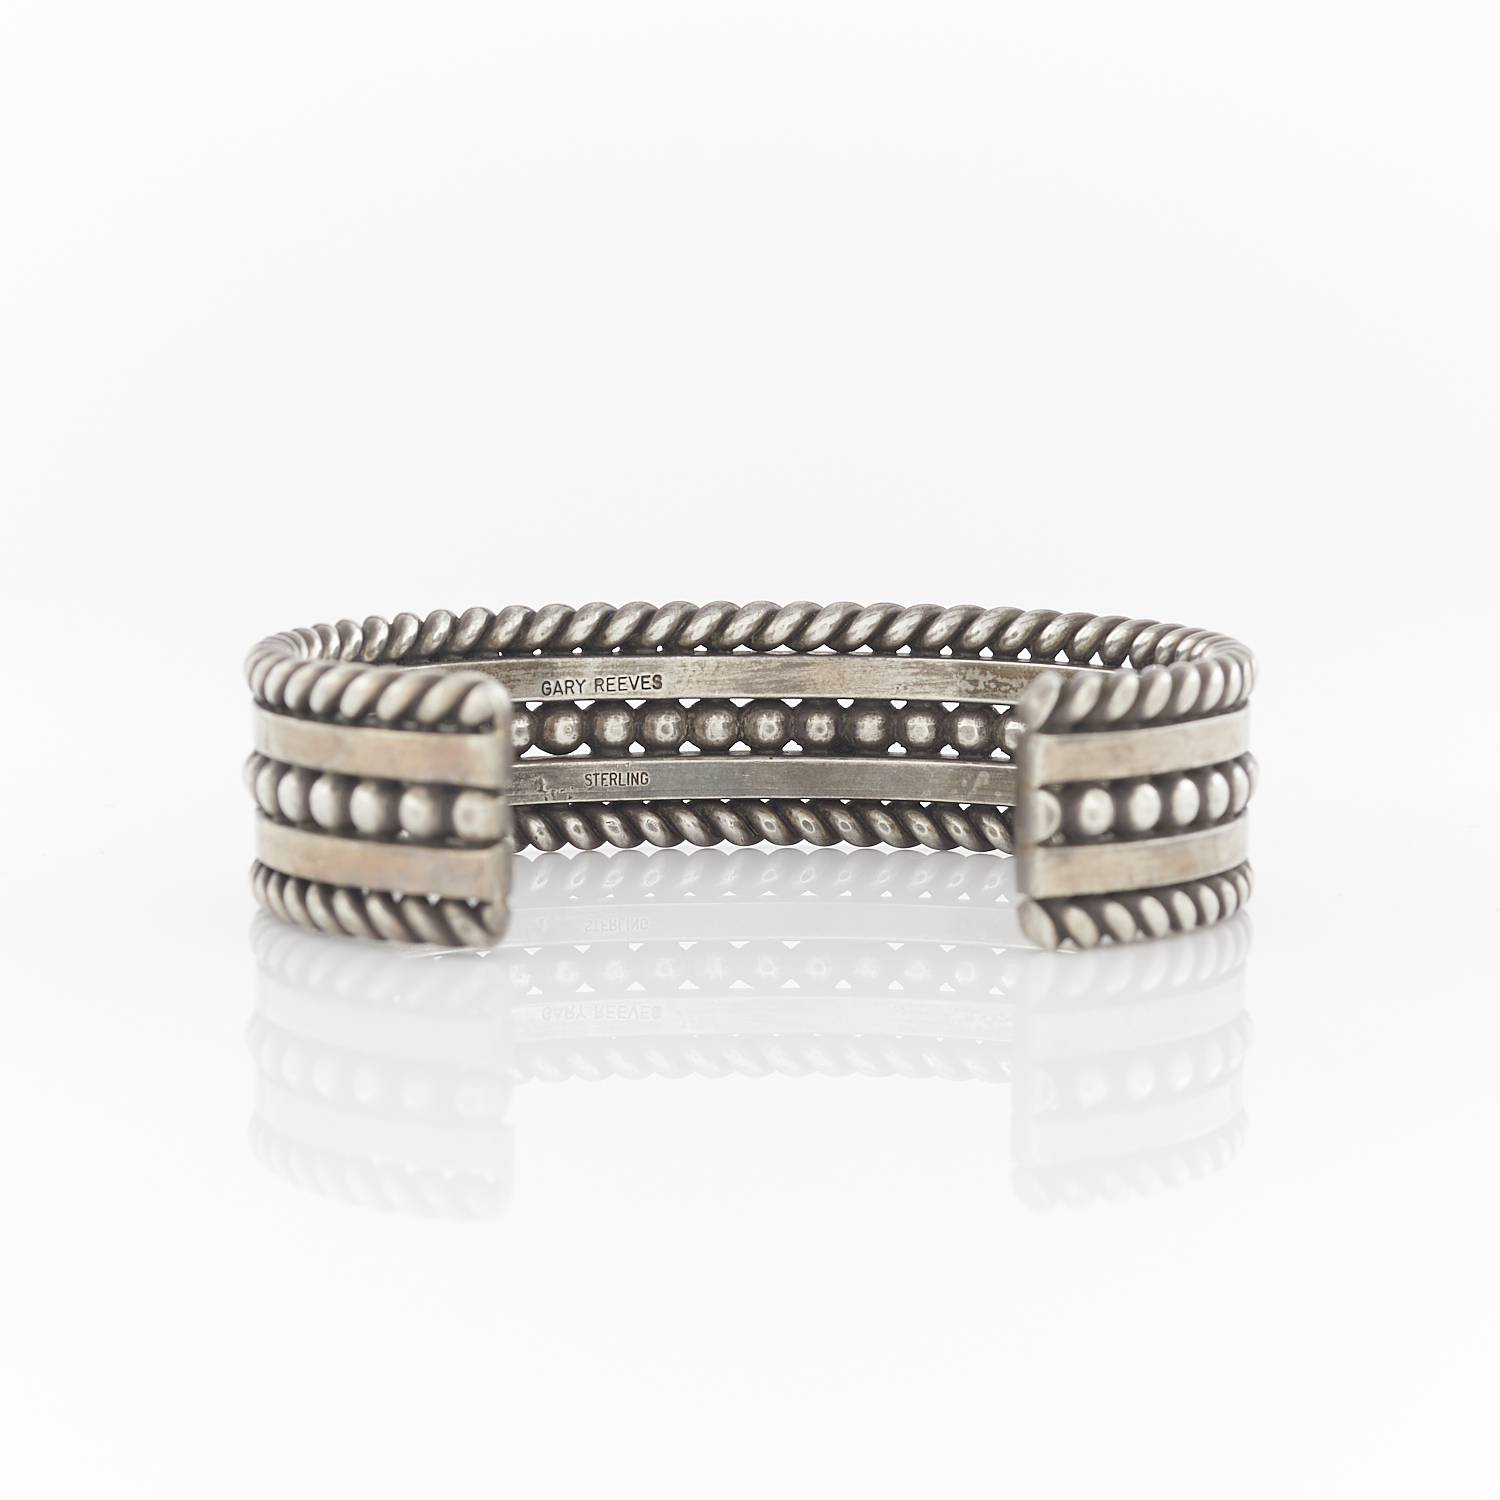 Gary Reeves Sterling Silver Bangle - Image 5 of 10